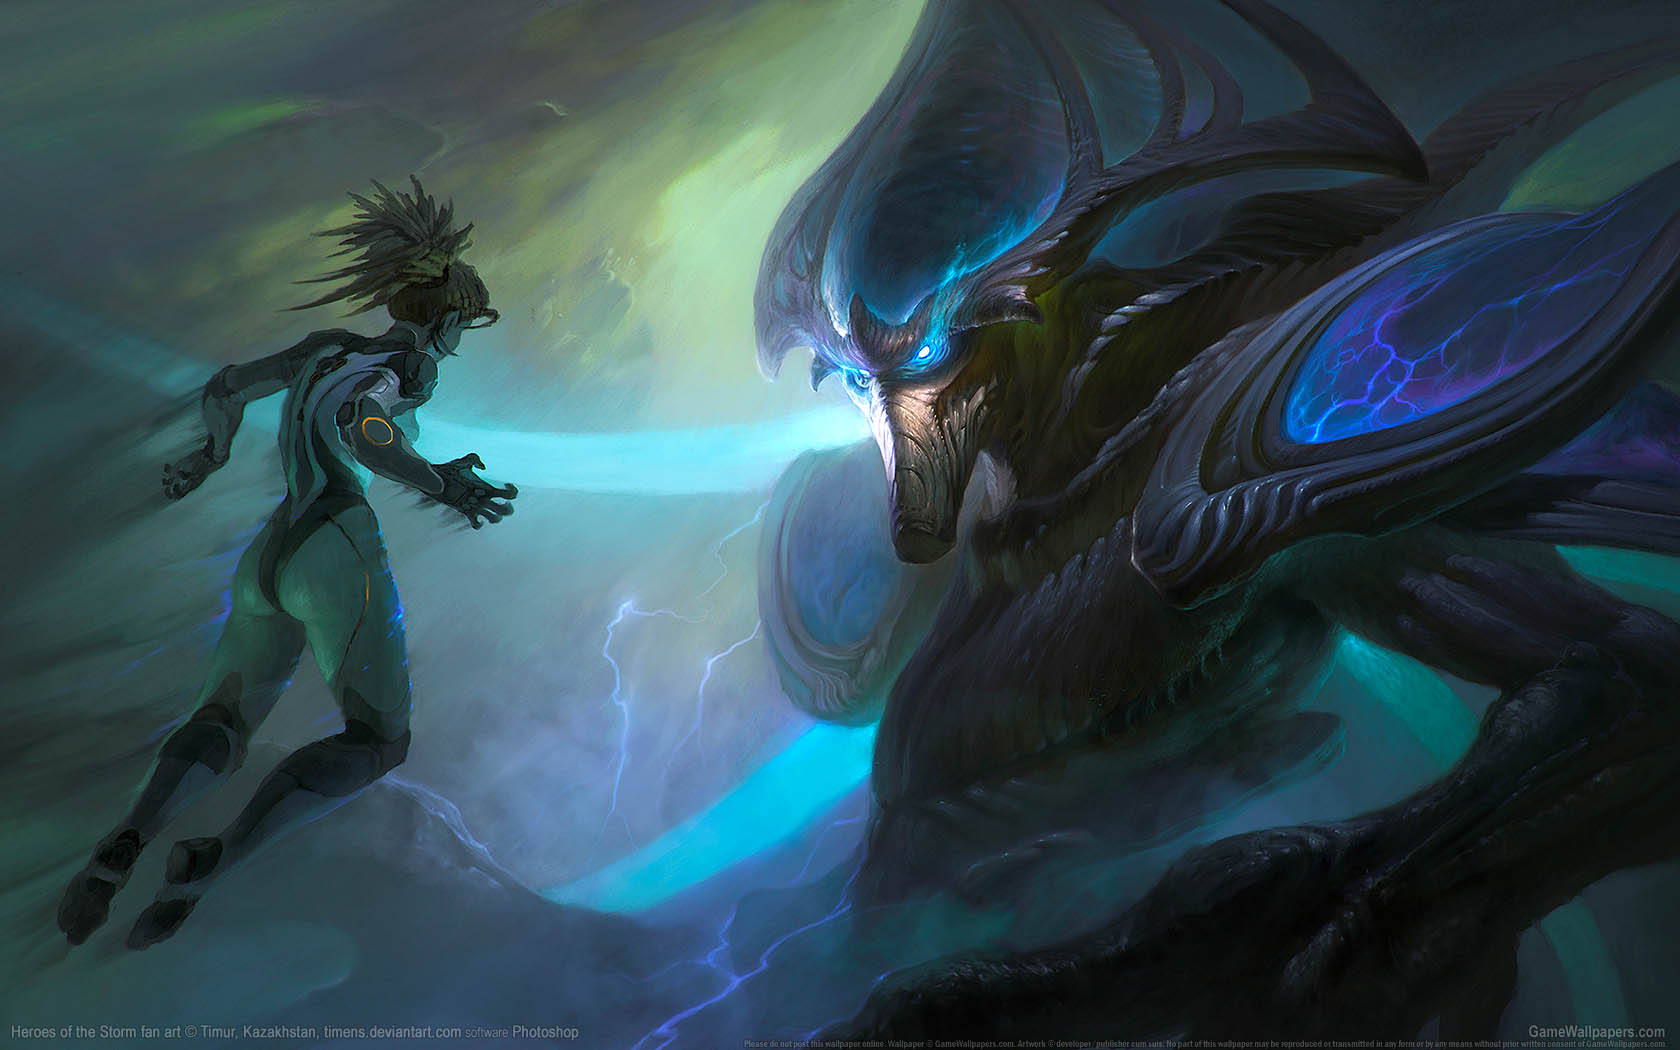 Heroes of the Storm fan art achtergrond 09 1680x1050